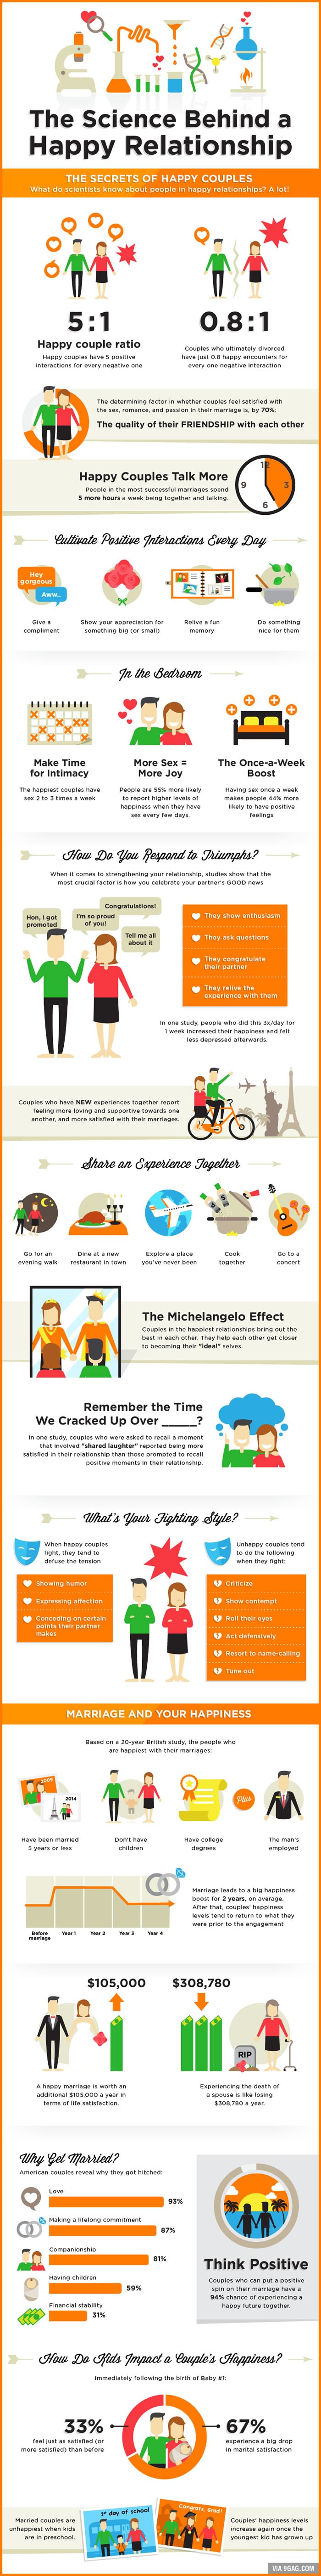 the science behind a happy relationship, info graphic